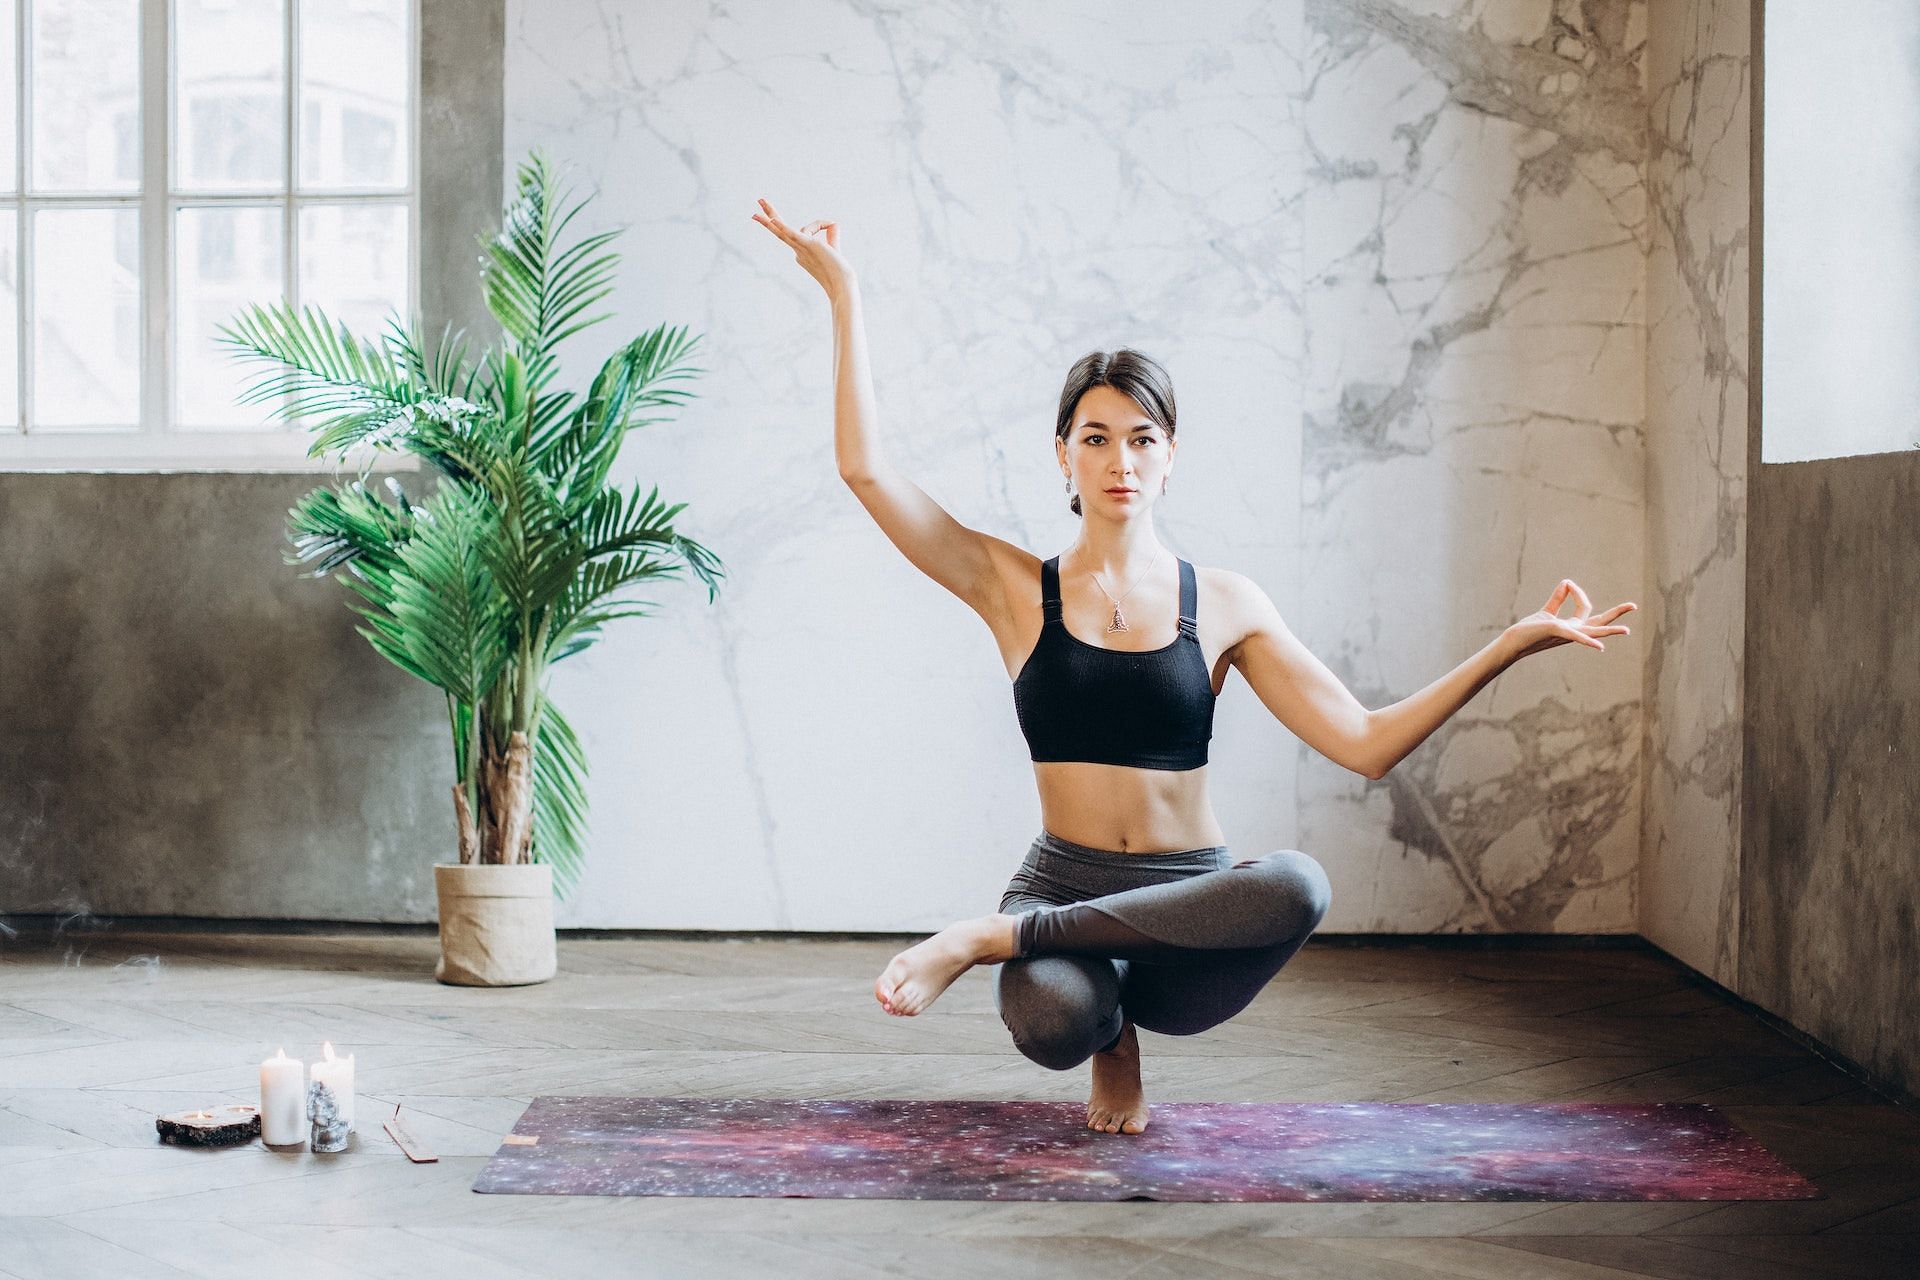 The Best Yoga Poses To Build Better Balance | Liforme